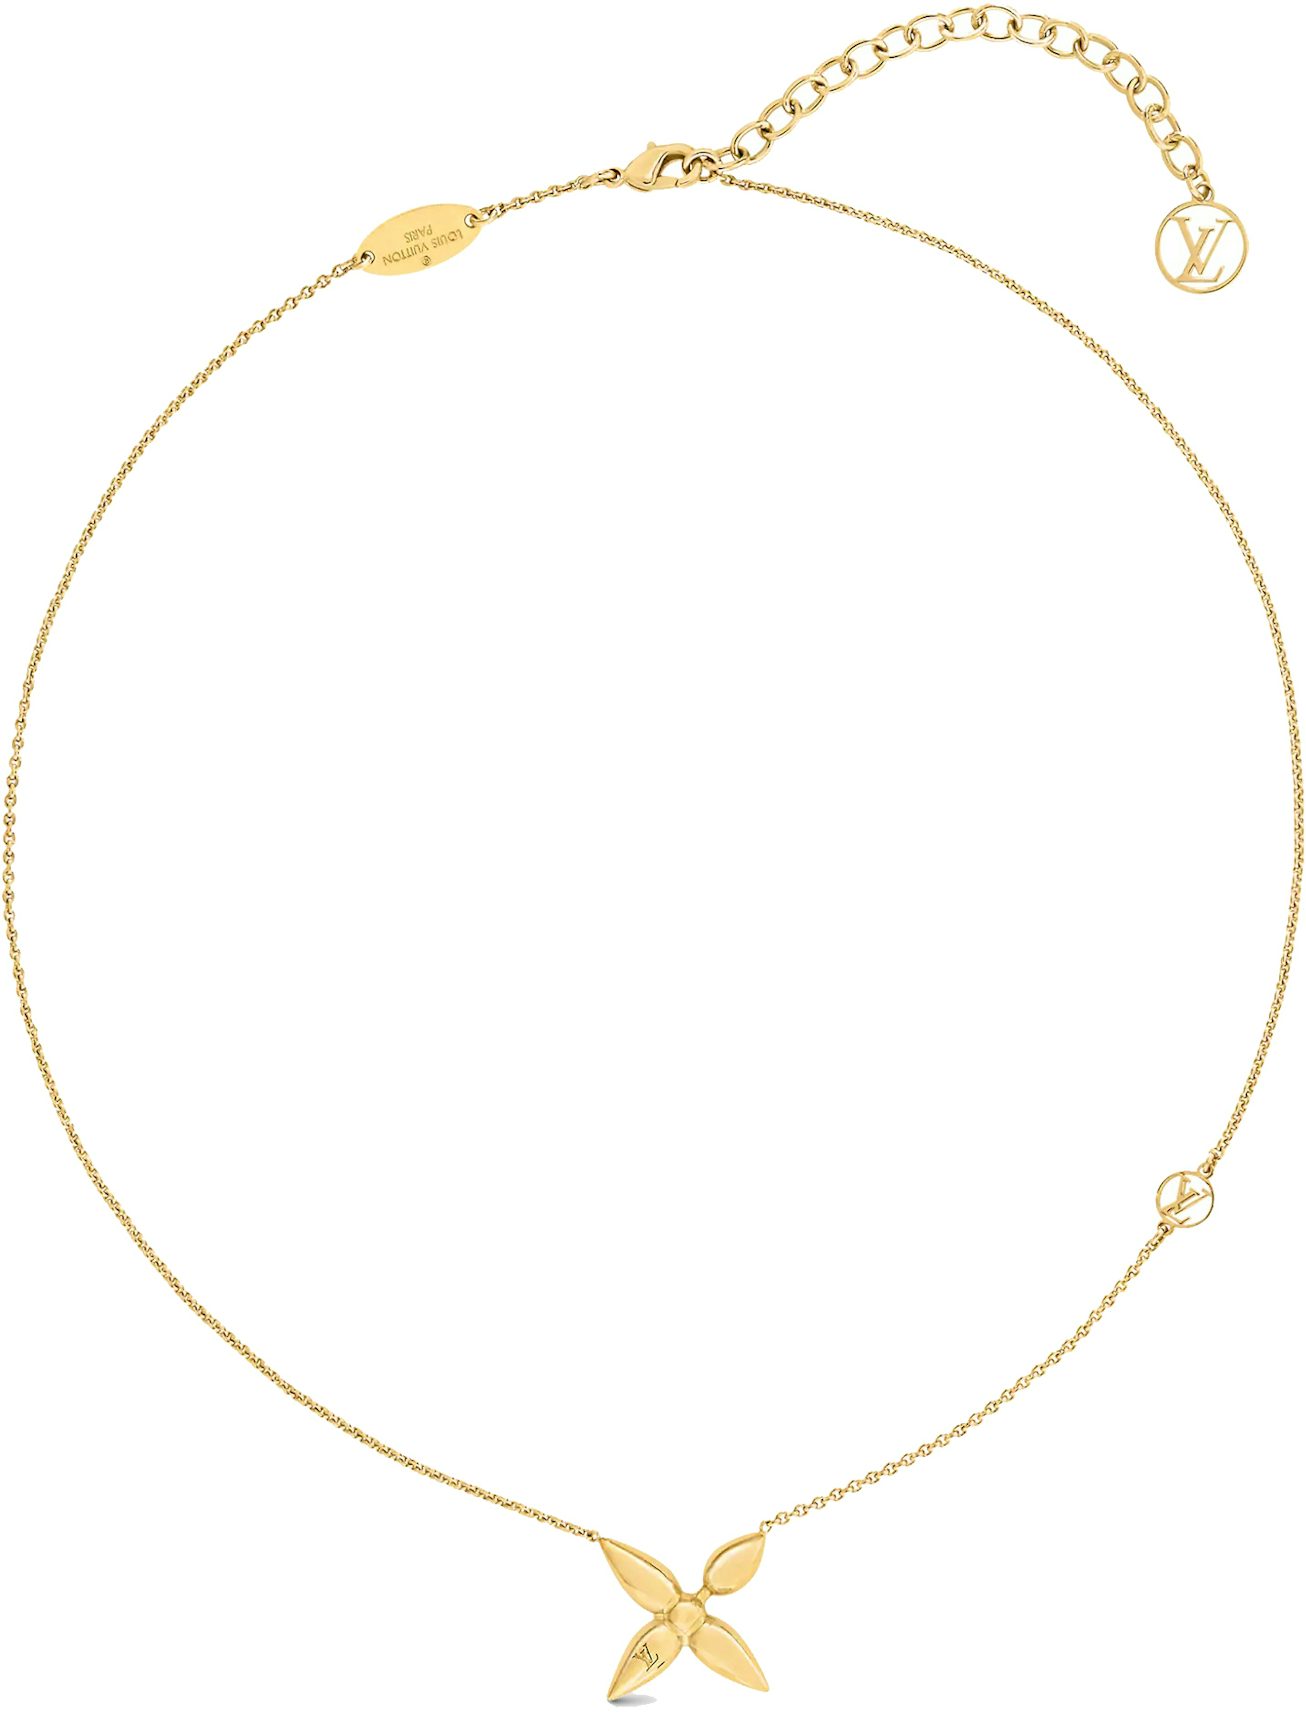 Louis Vuitton Louisette Necklace Gold in Gold Metal with Gold-tone